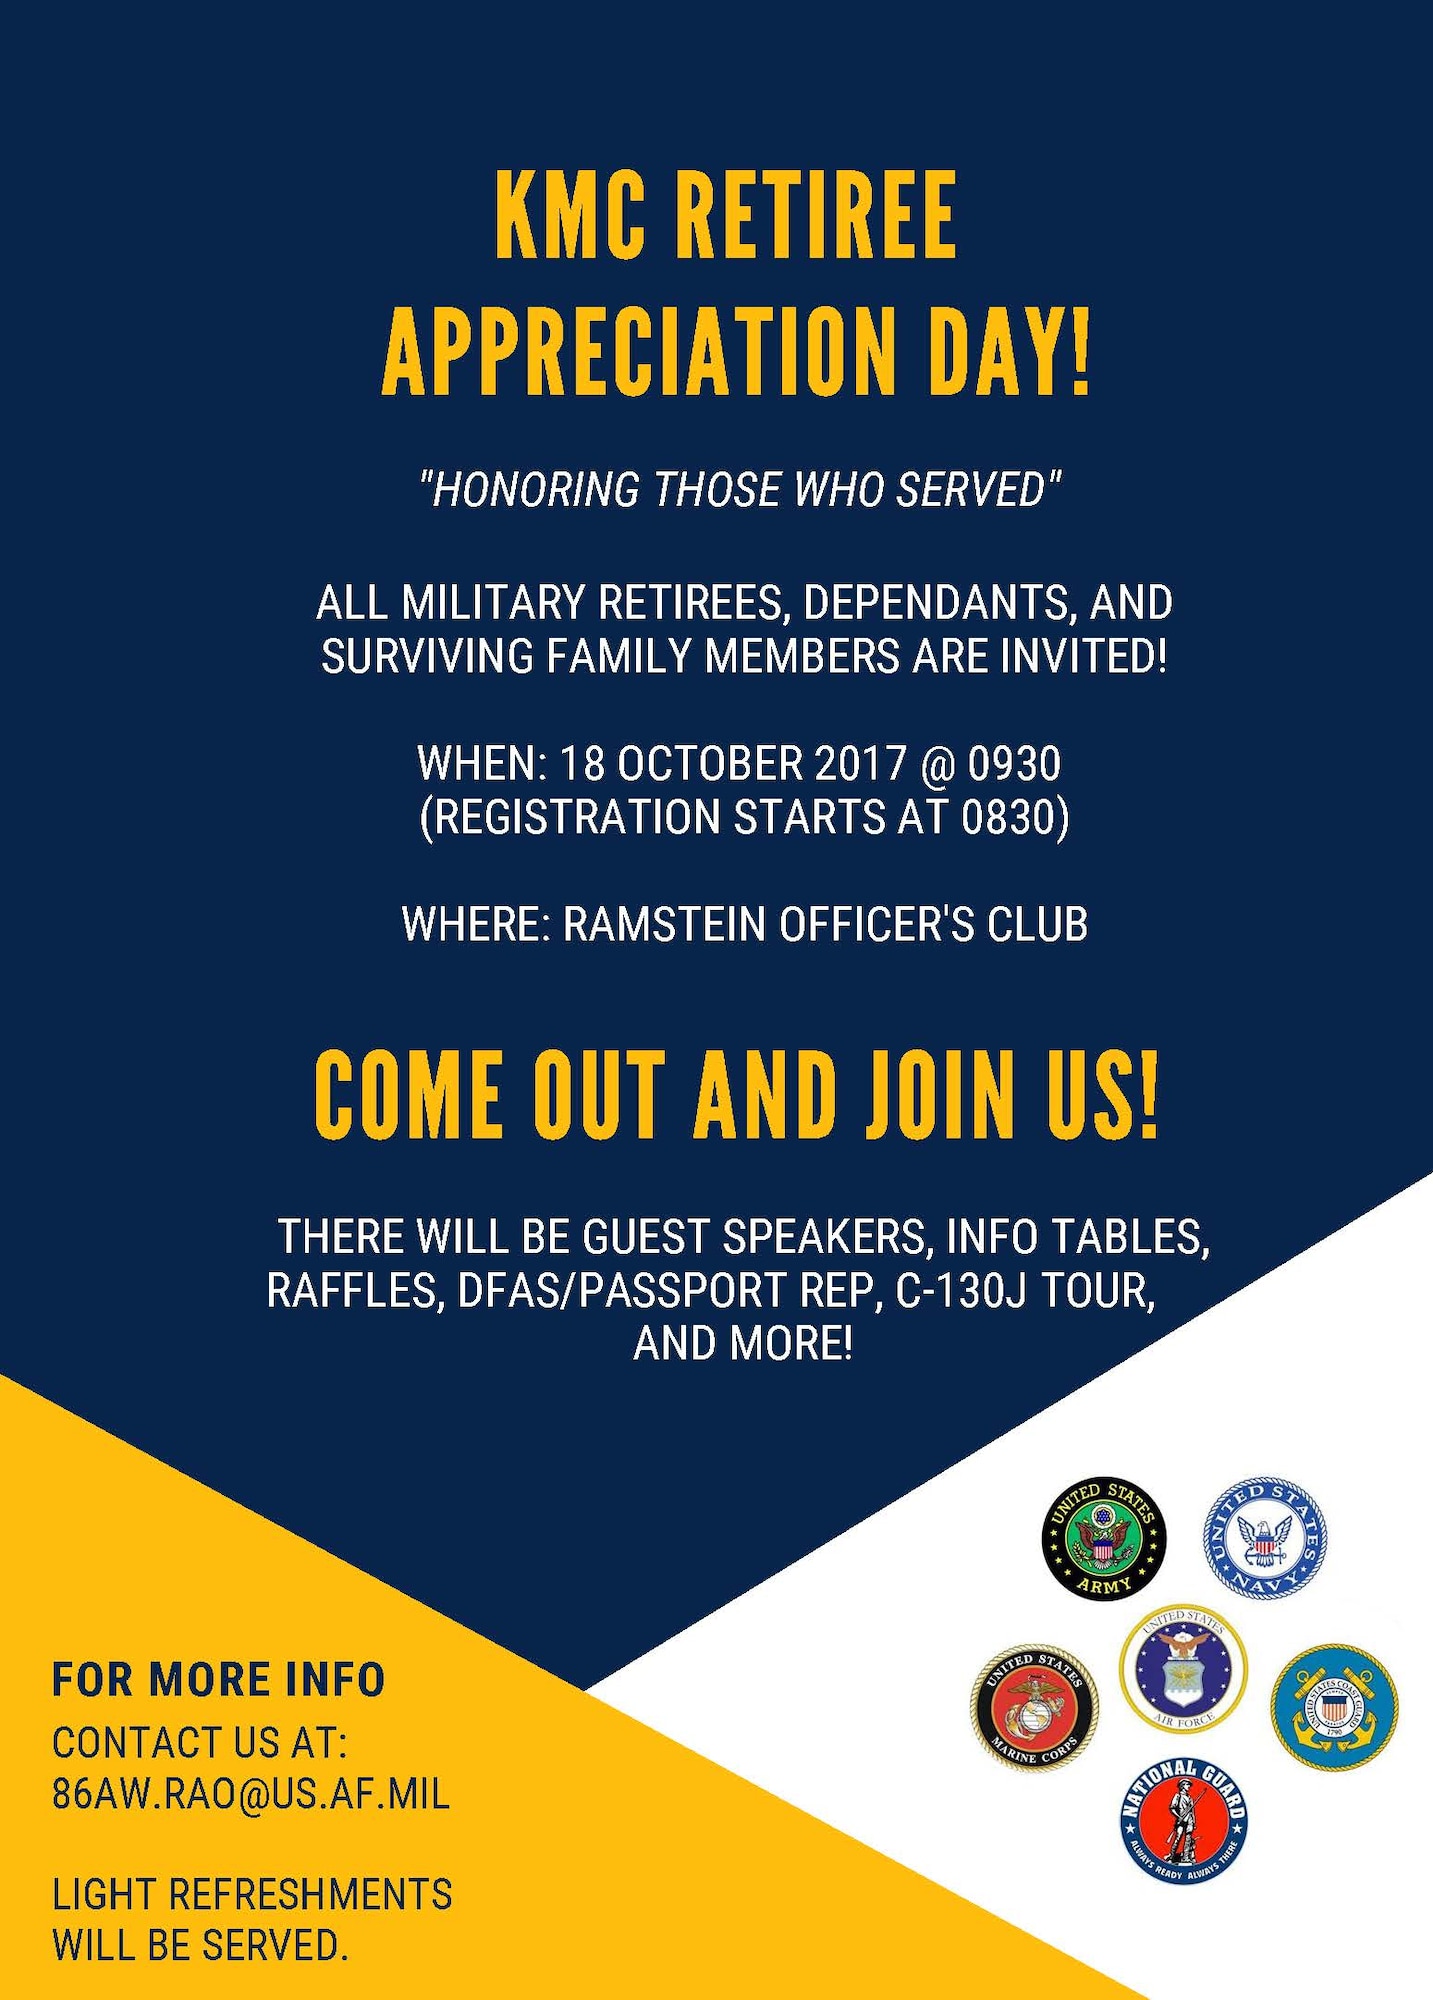 The 86th Airlift Wing Retiree Activities Office will host the Retiree Appreciation Day at the Ramstein Officer’s Club on Ramstein Air Base, Germany, Oct. 28, starting at 9:30 a.m.